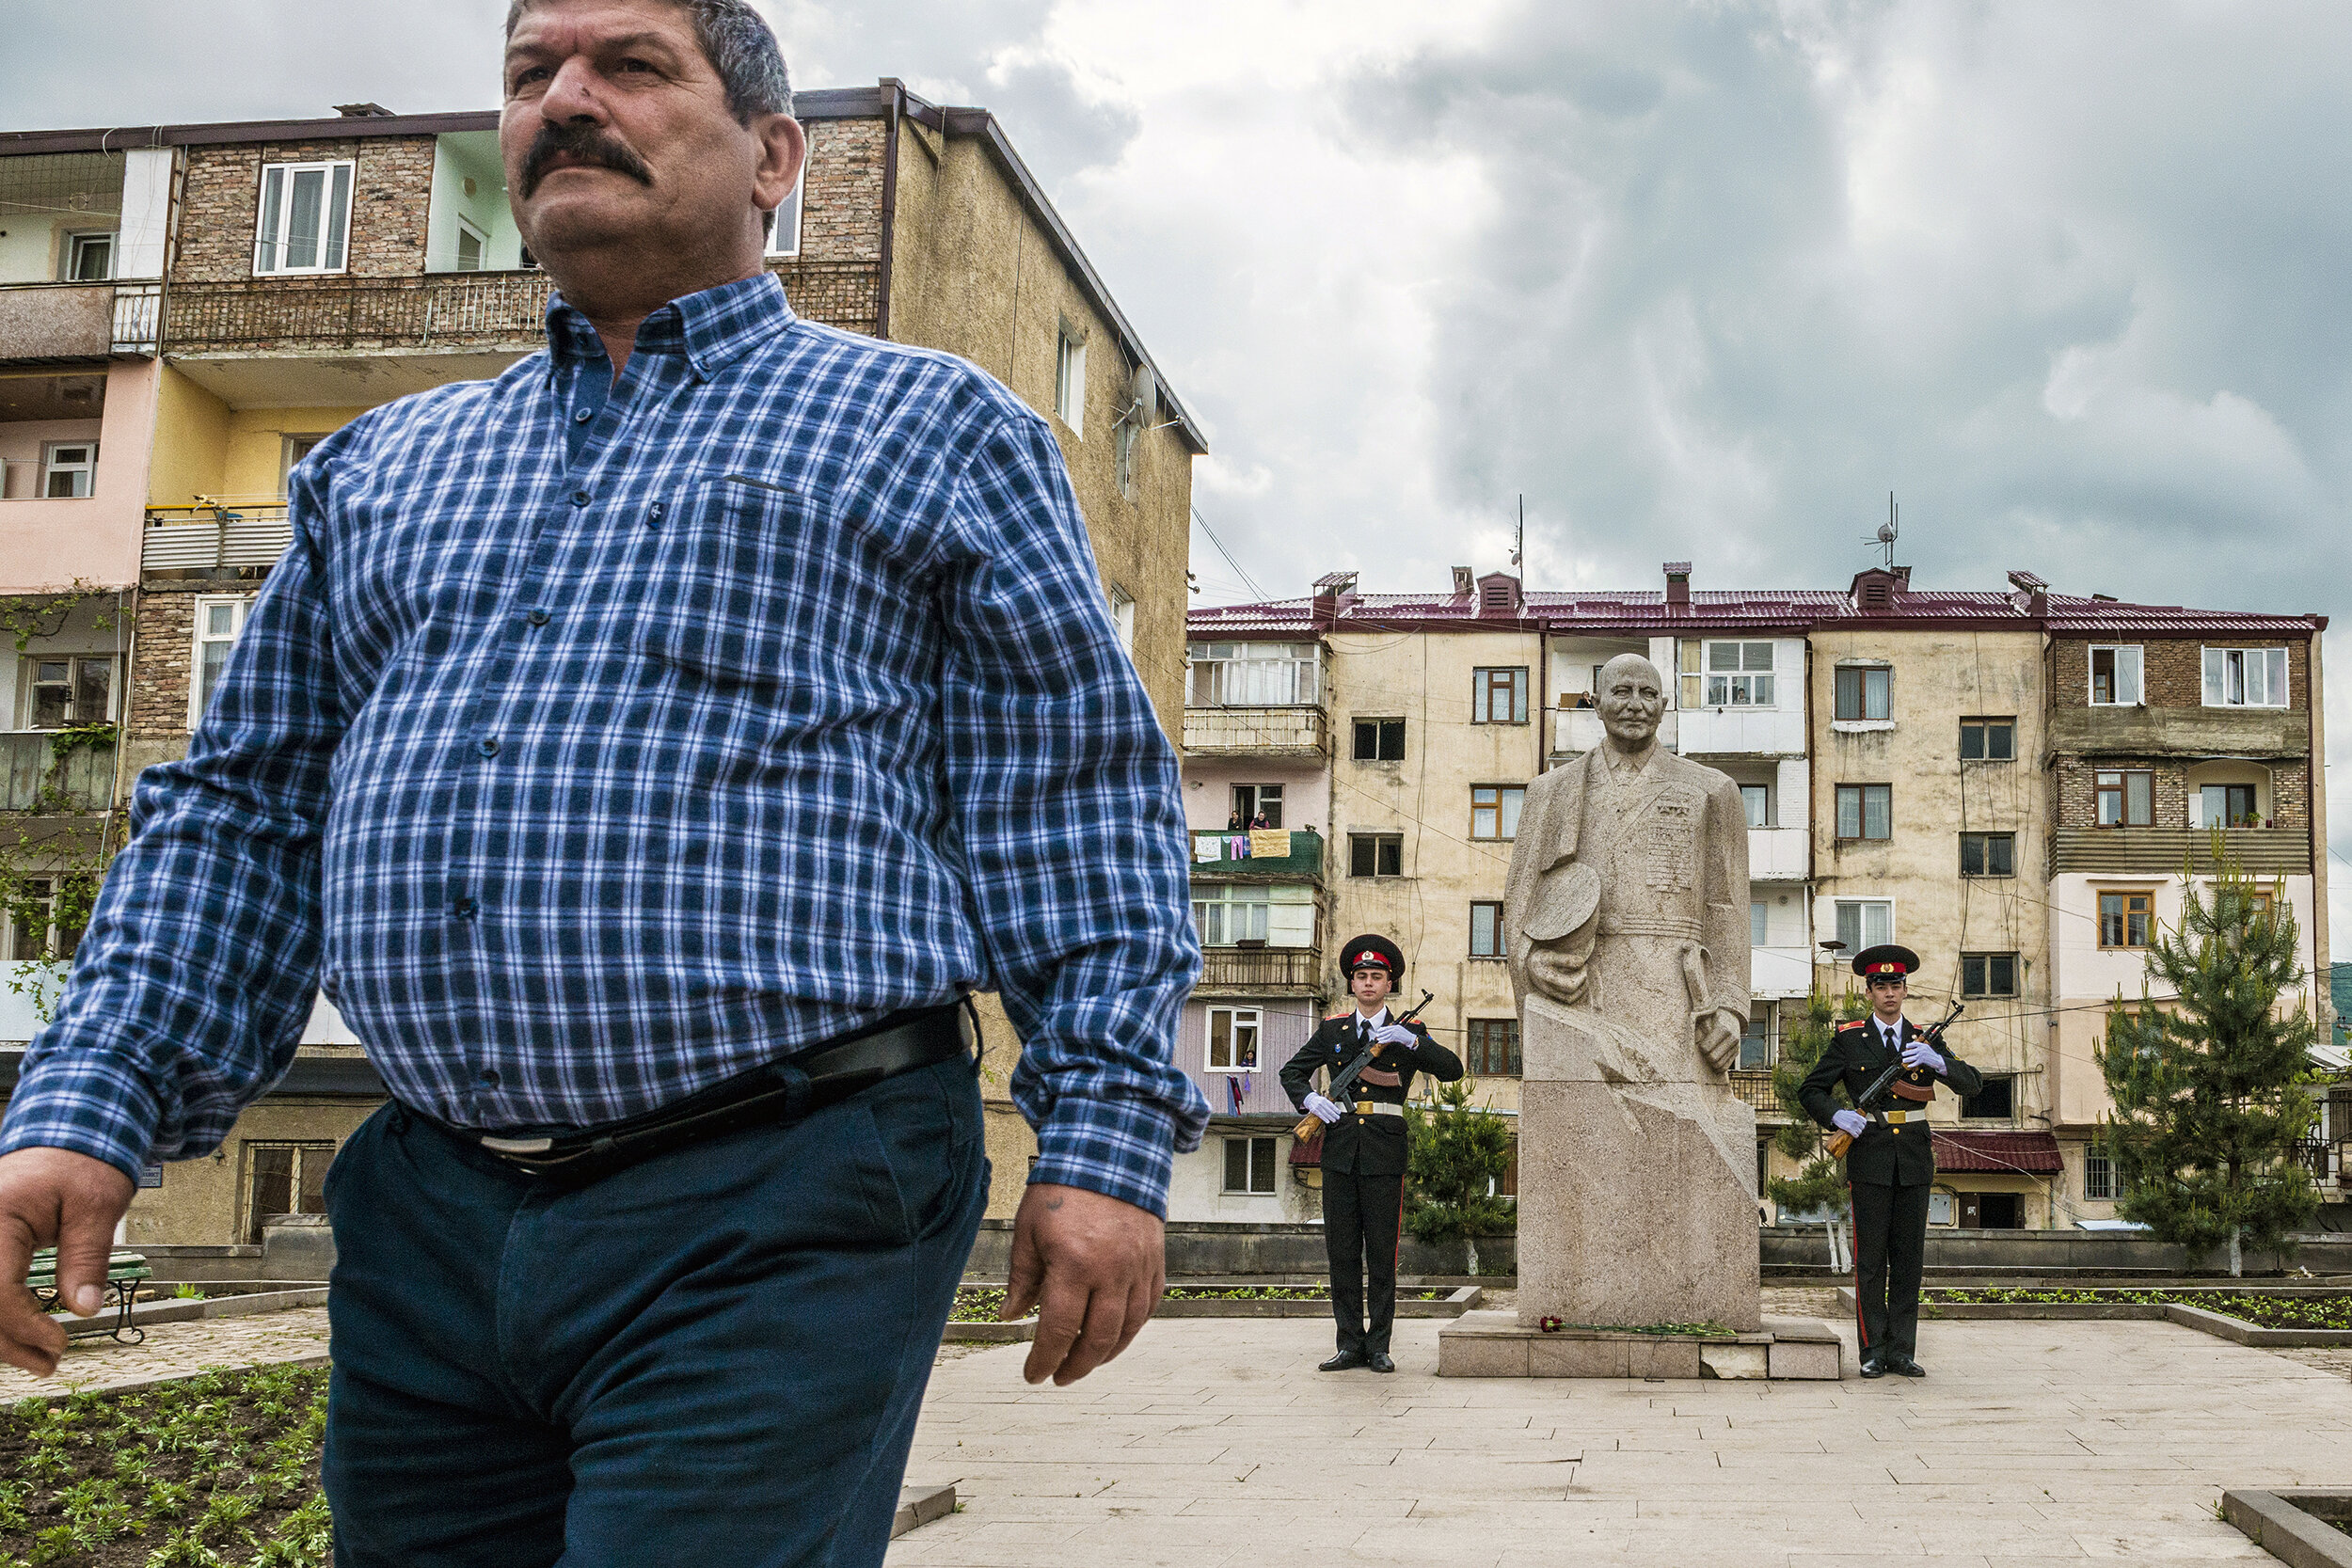  A man rejoins the annual Victory Day parade in Stepanakert, Nagorno-Karabakh after placing a rose between ceremonial guards at the foot of a statue of Ivan Bagramyan.  Bagramyan was a celebrated Soviet military commander of Armenian descent who foug